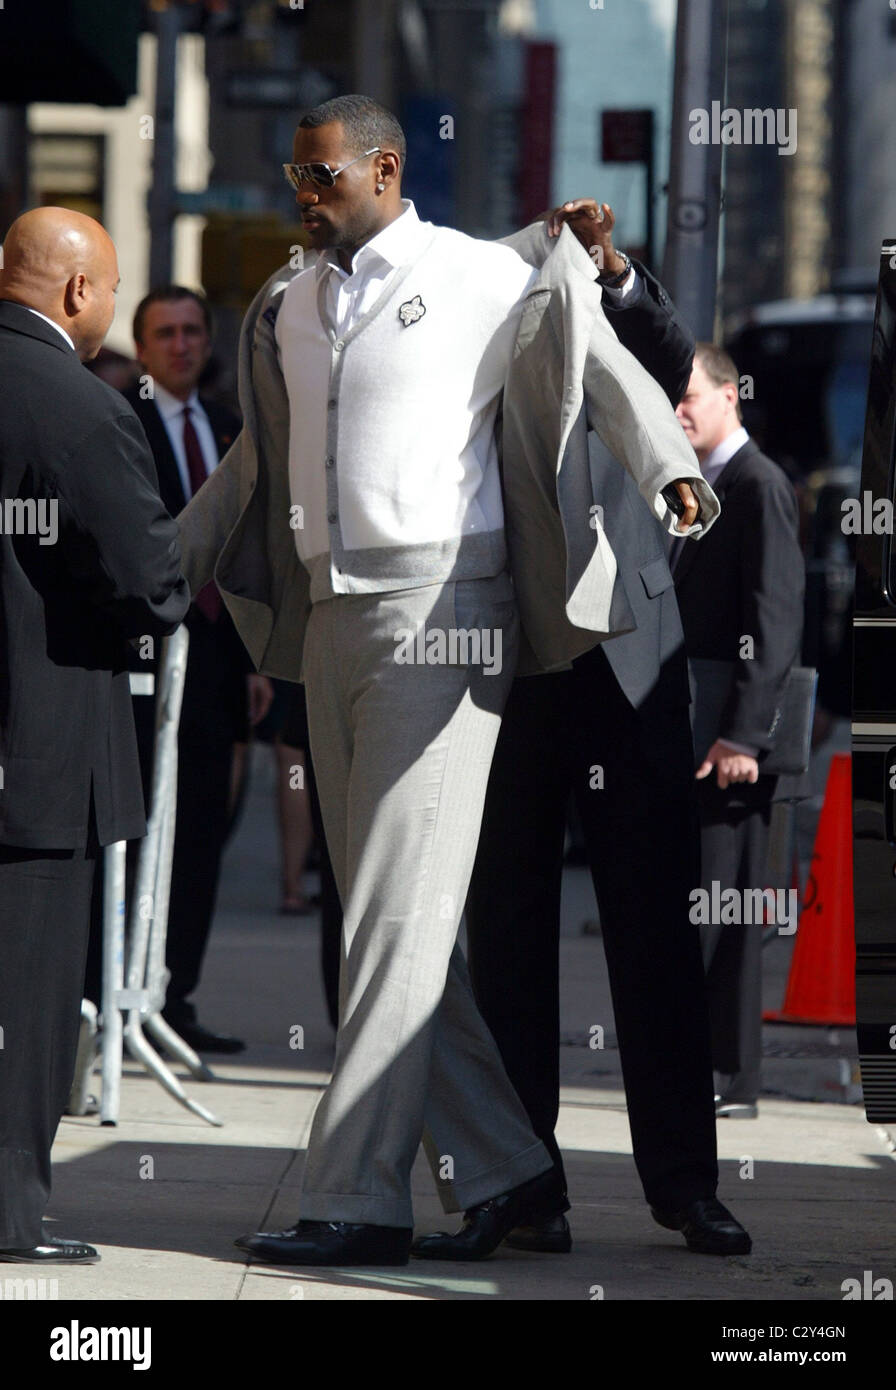 LeBron James outside the Ed Sullivan Theater for the 'Late Show With David Letterman' New York City, USA - 10.09.08 Stock Photo